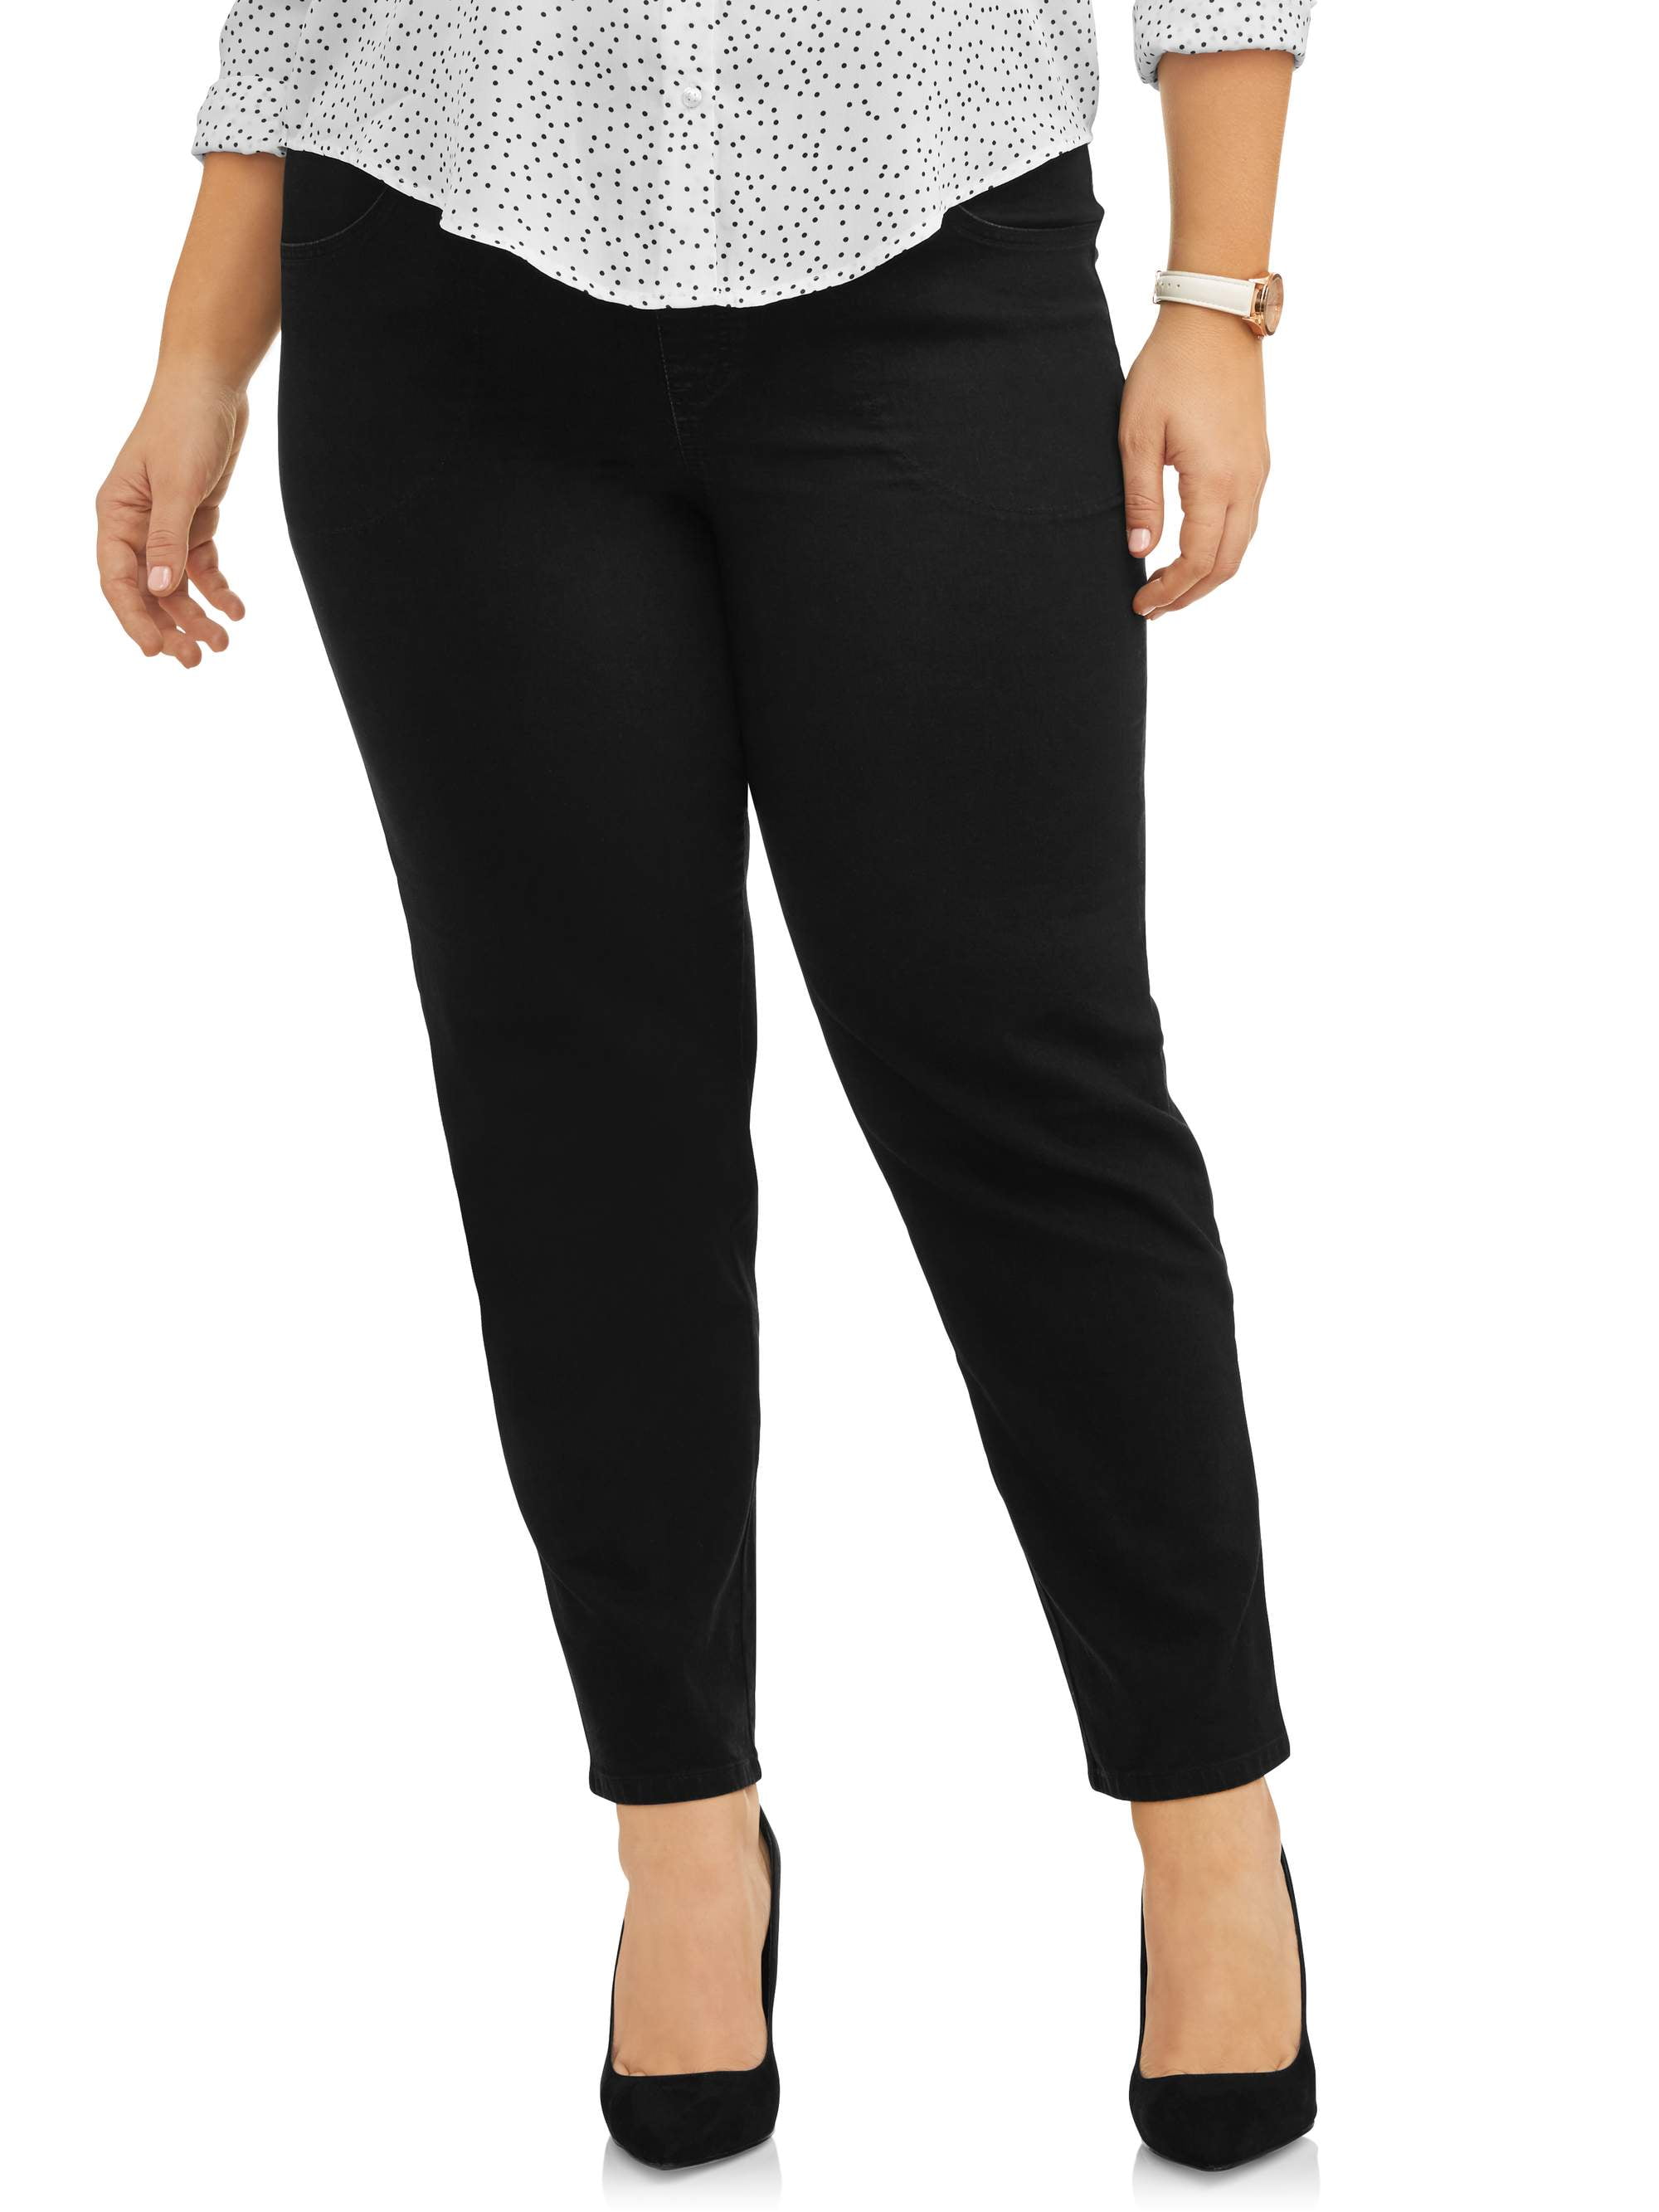 Details about   Womens Pull On Stretch Woven Pants Just My Size Plus also in Petite Choose Color